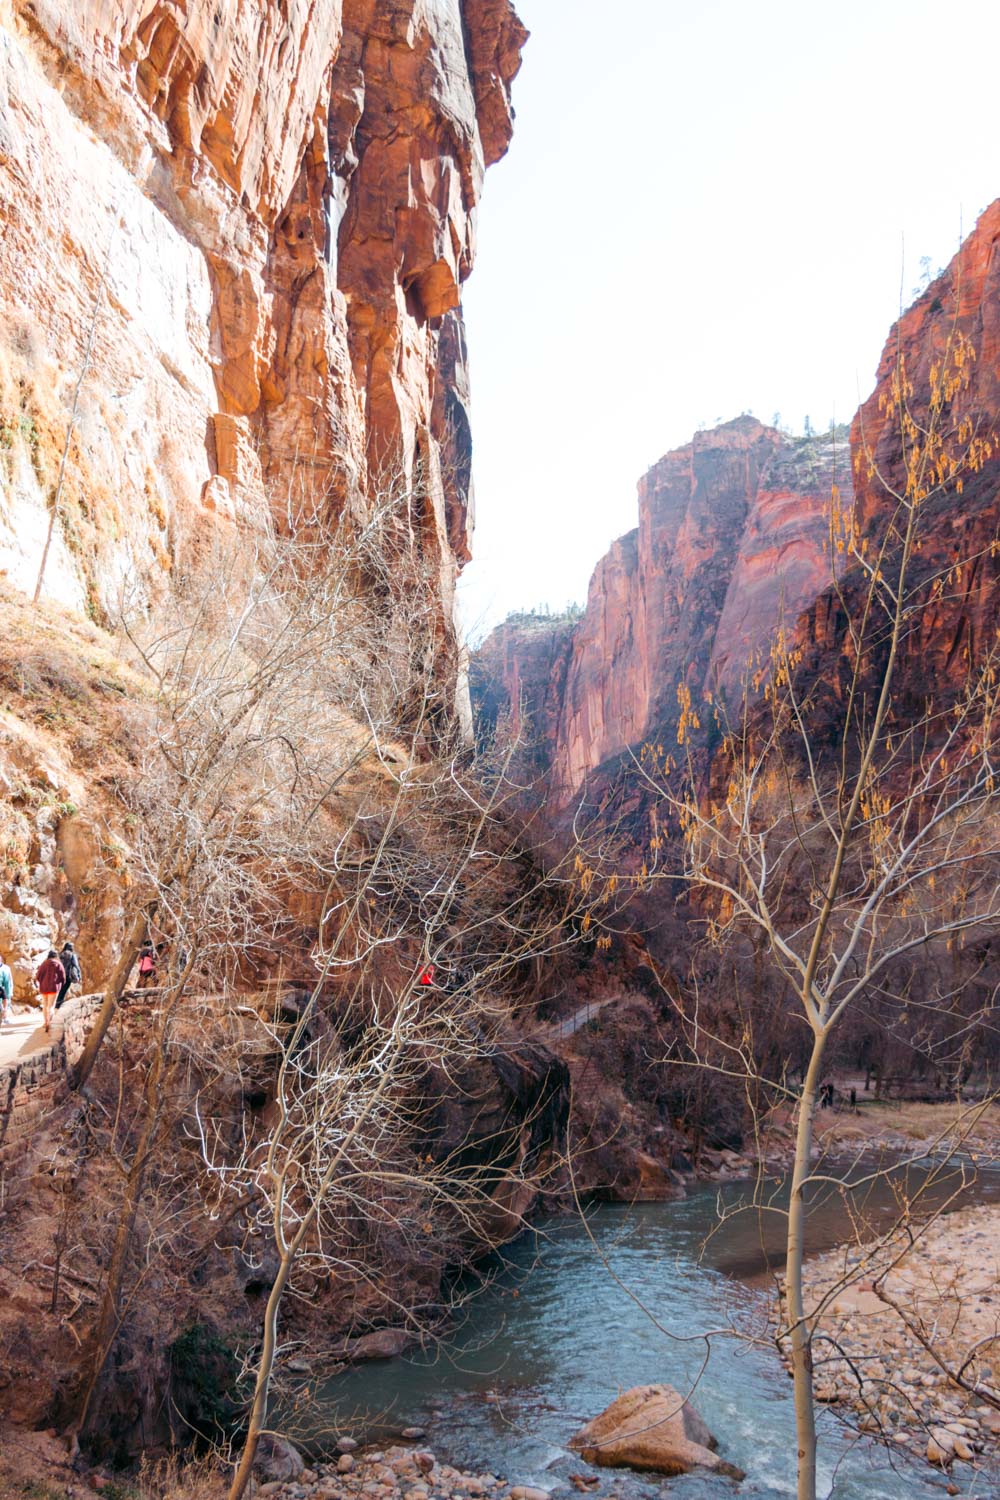 Where to stay in and near Zion National Park - Roads and Destinations